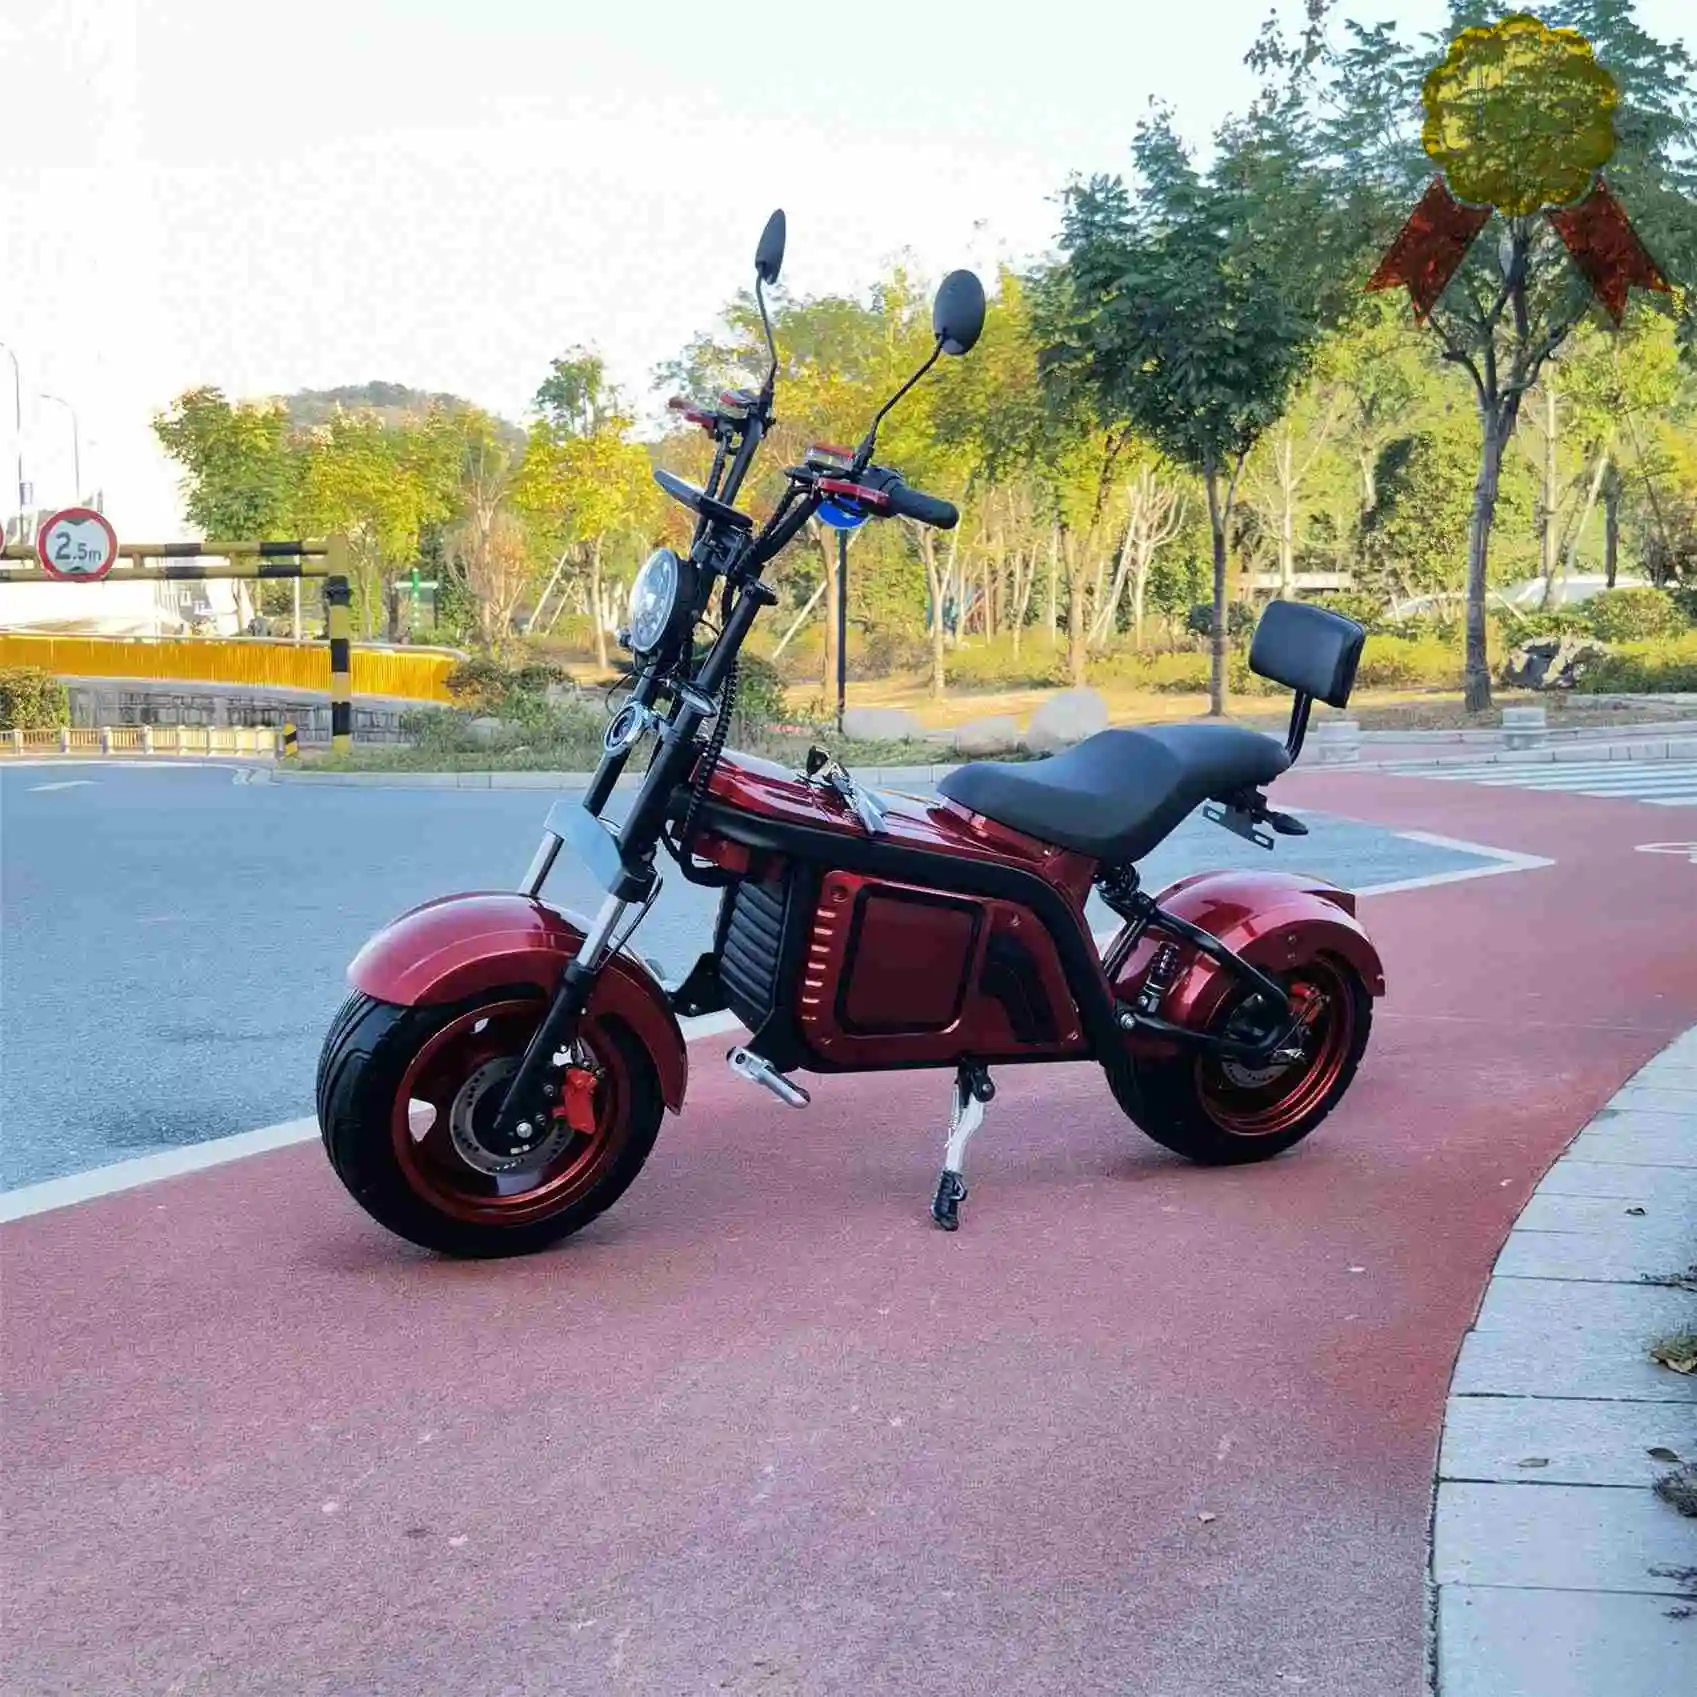 

2022 Free Shipping New Arrival Two Wheels Smart Electric Balance Scooter Self Balancing Motorcycle Electric Scooter